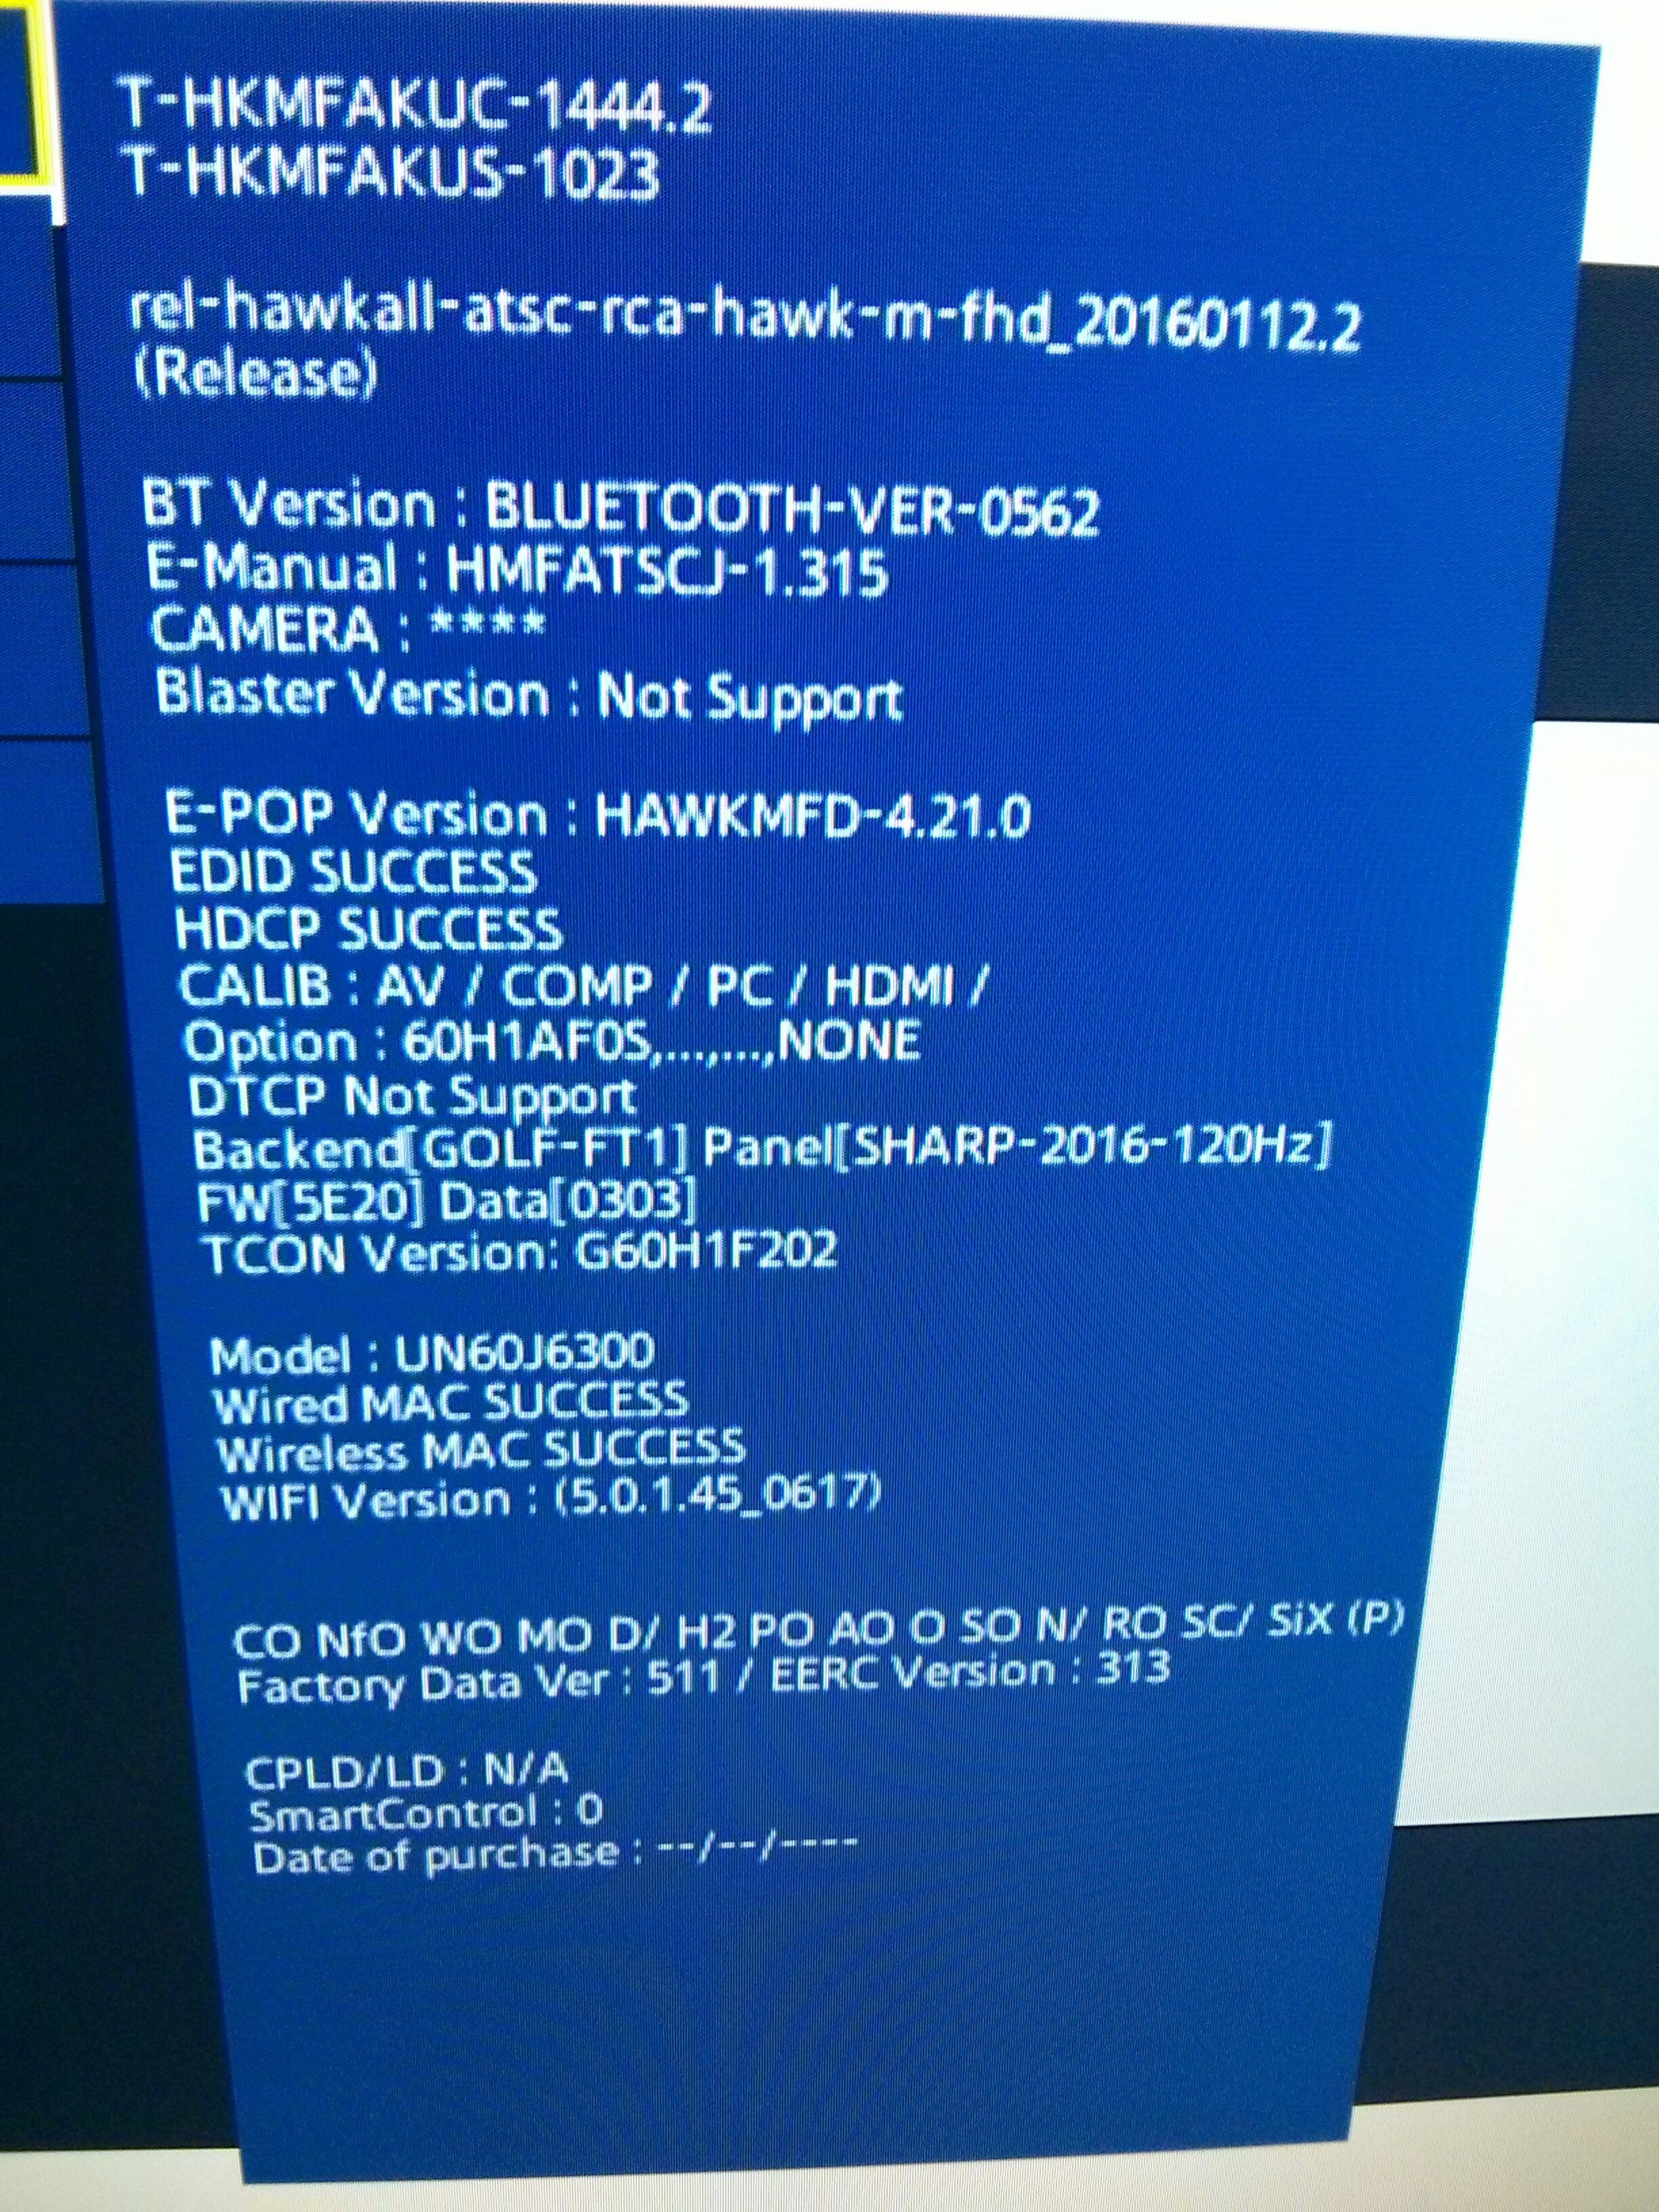 Samsung smart tv serial number search